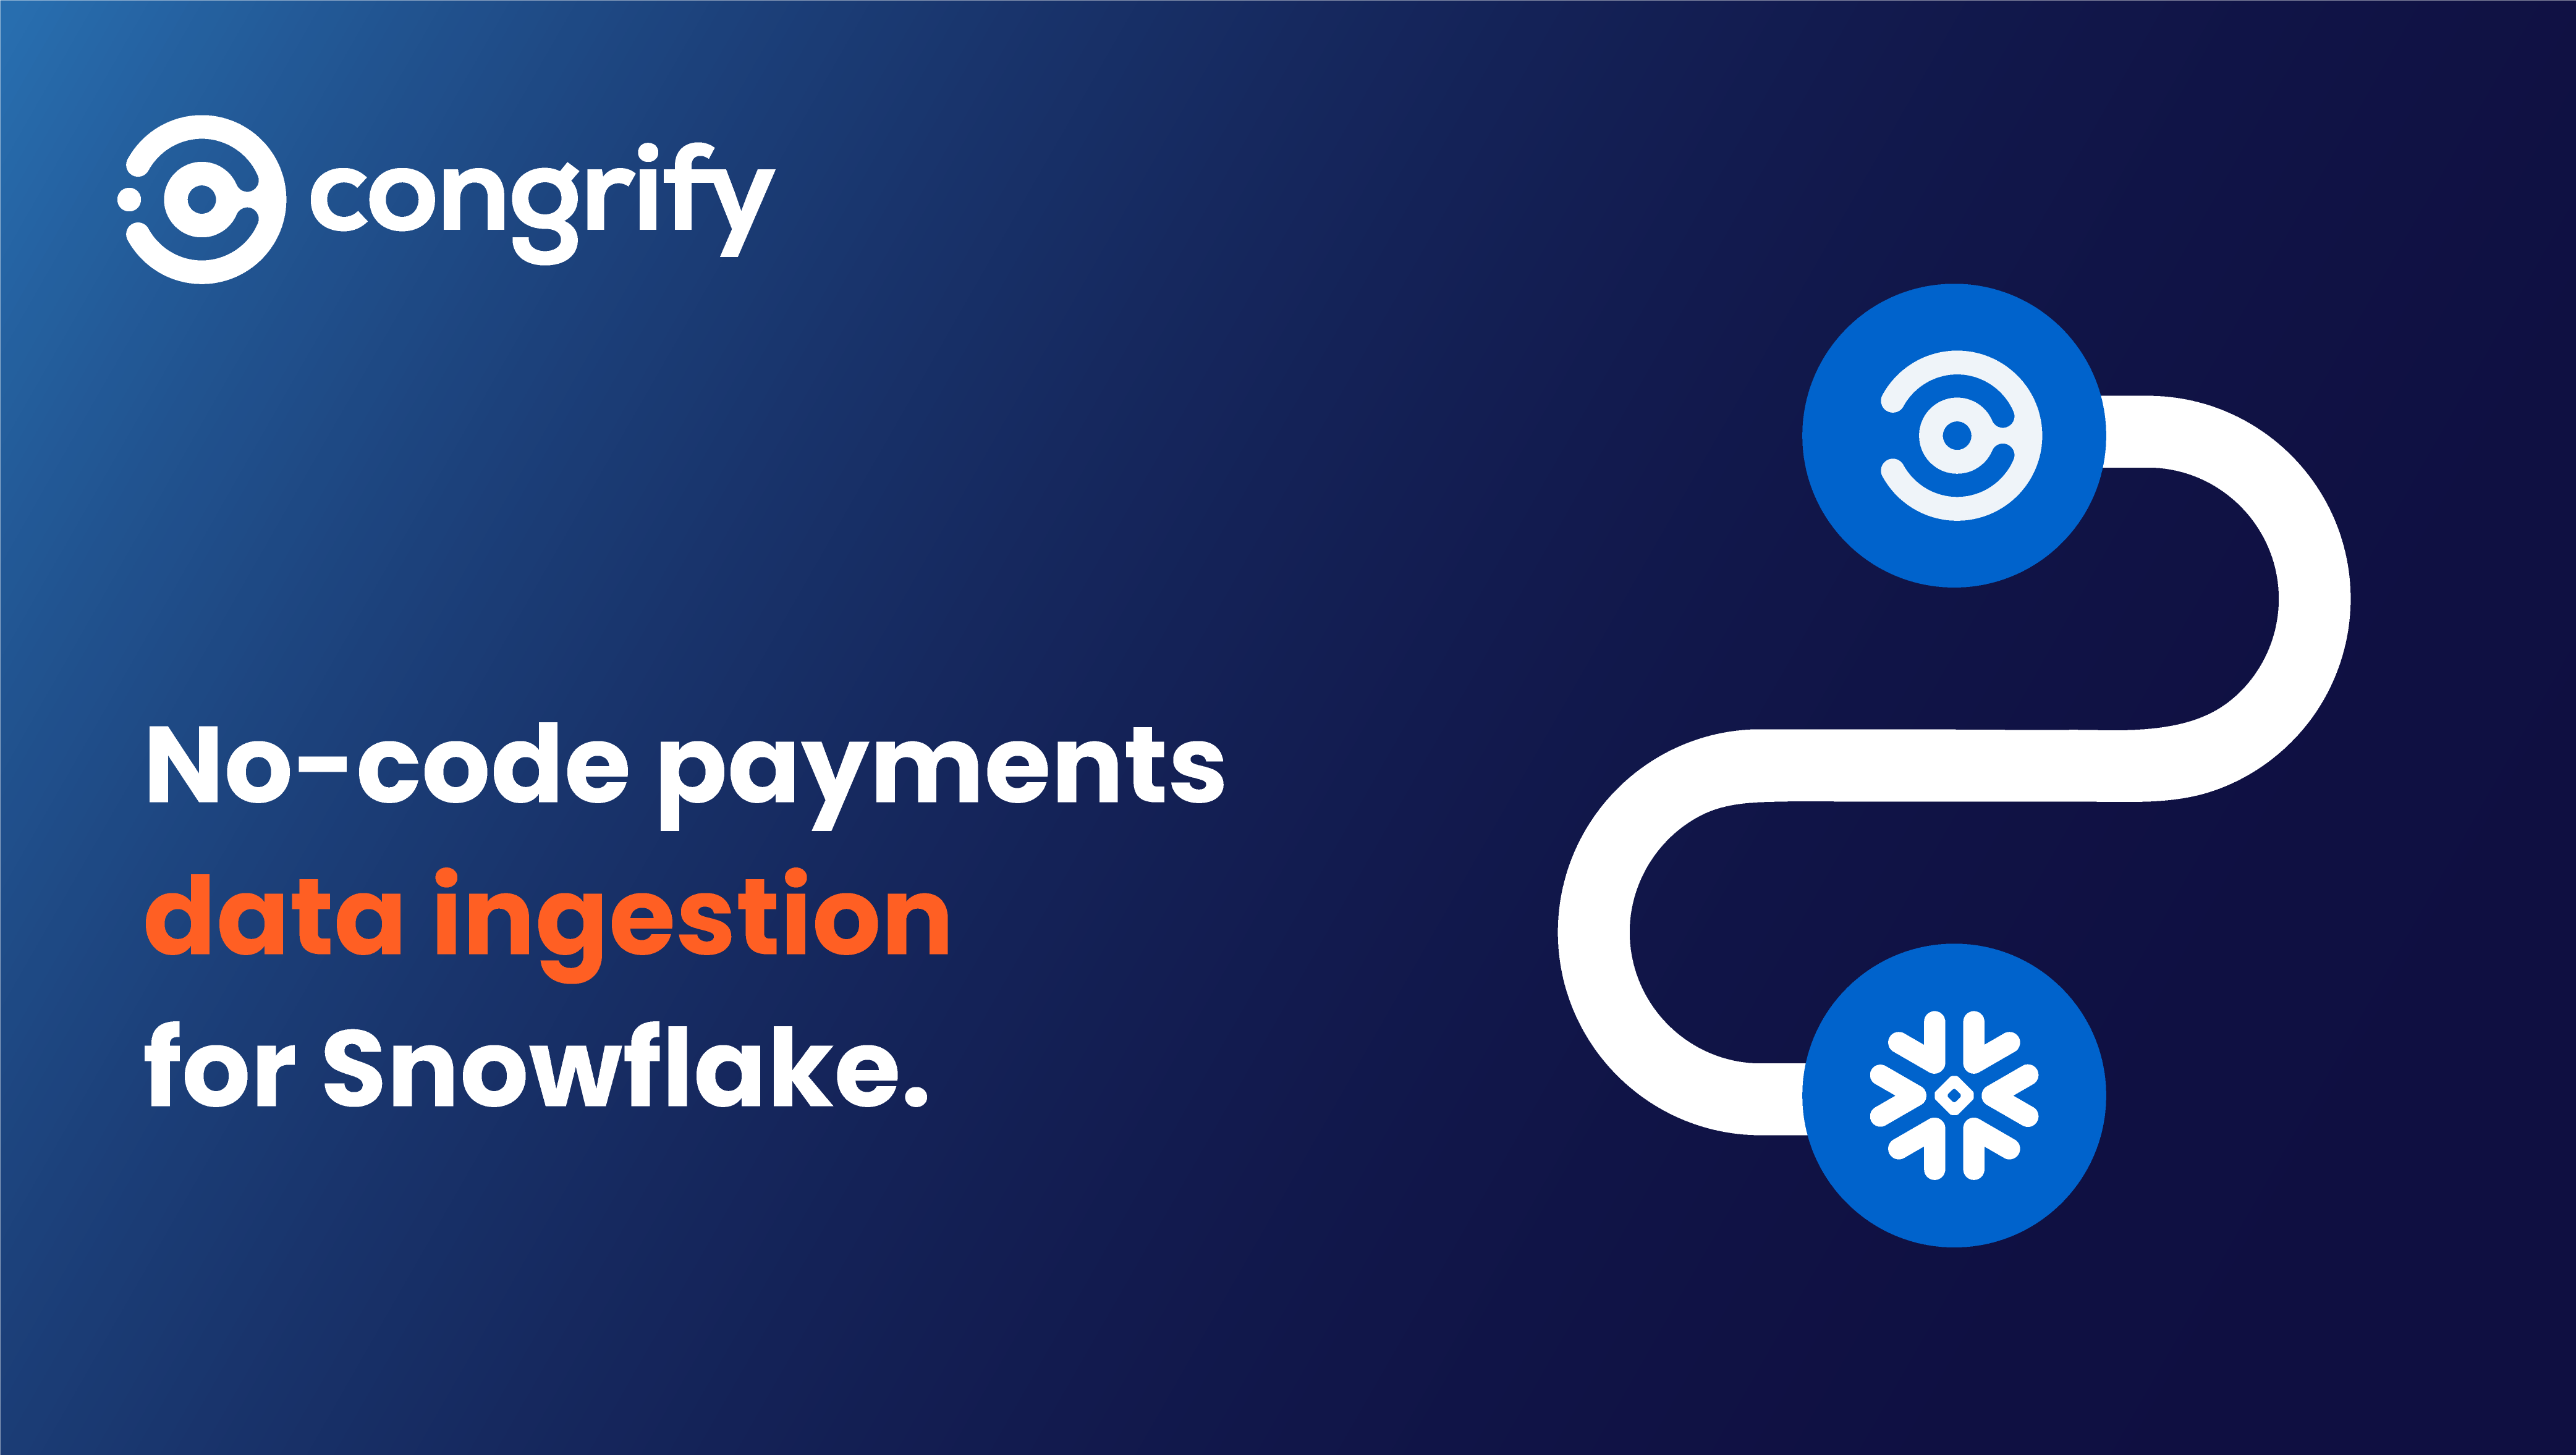 No-code payment data ingestion with Snowflake.